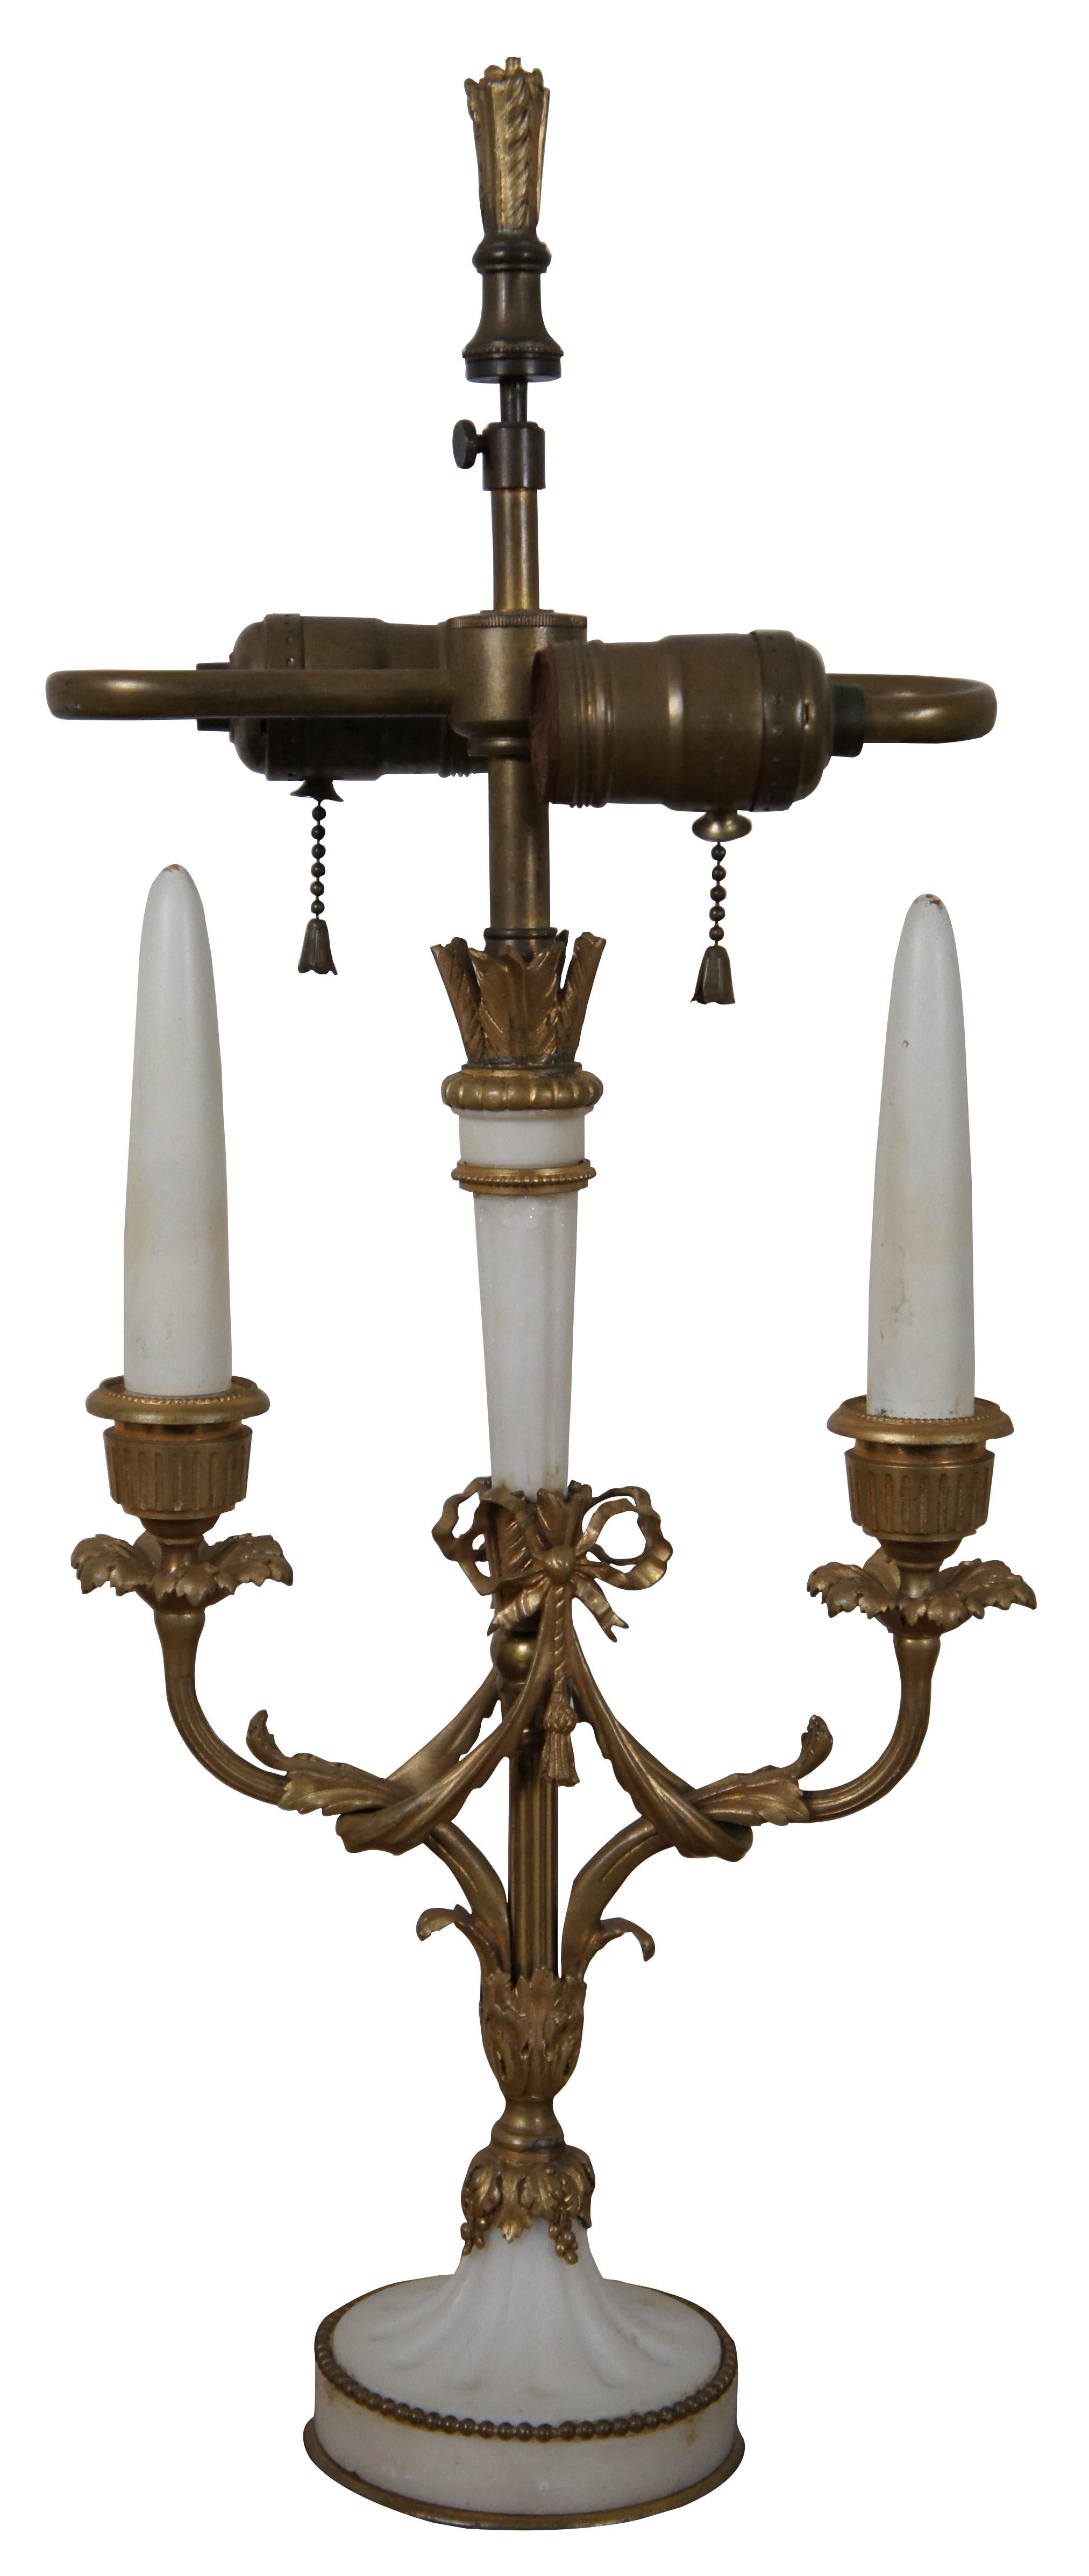 2 Antique French Neoclassical Gilt Bronze Alabaster Bouillotte Table Lamps In Good Condition For Sale In Dayton, OH